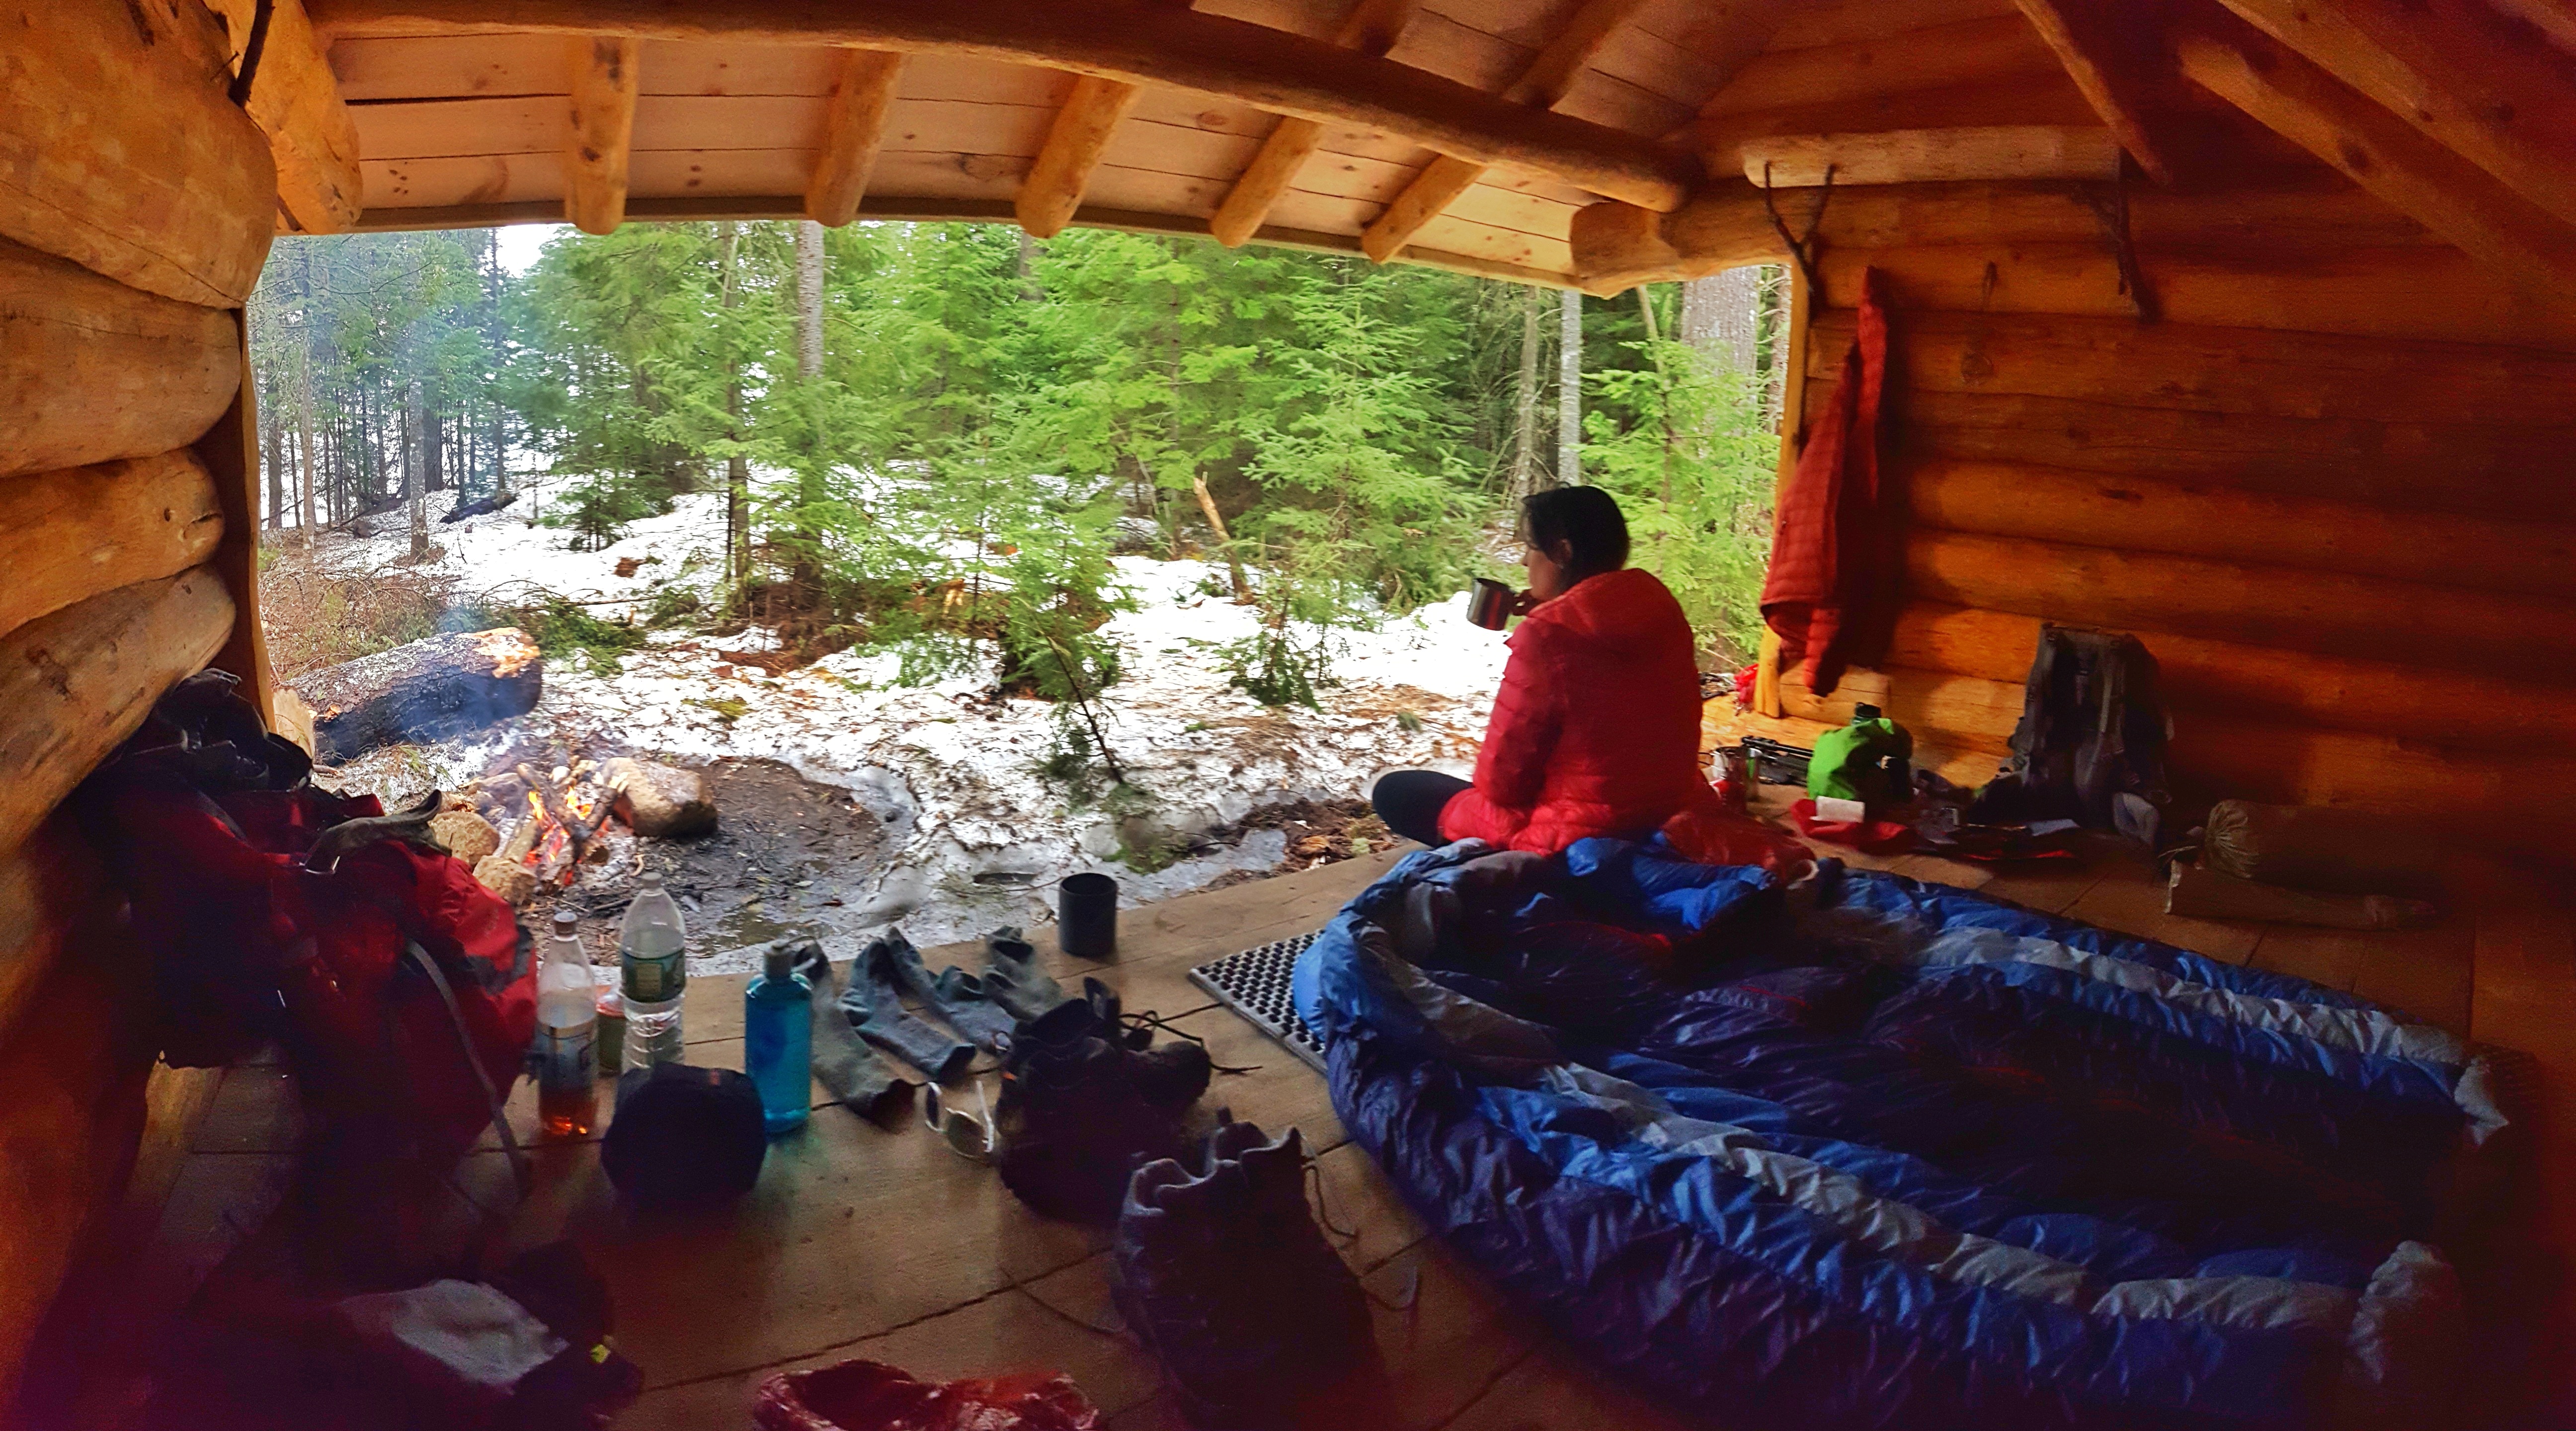 winter camping inside a lean-to in the Adirondacks; image credit to Dains_the_Name